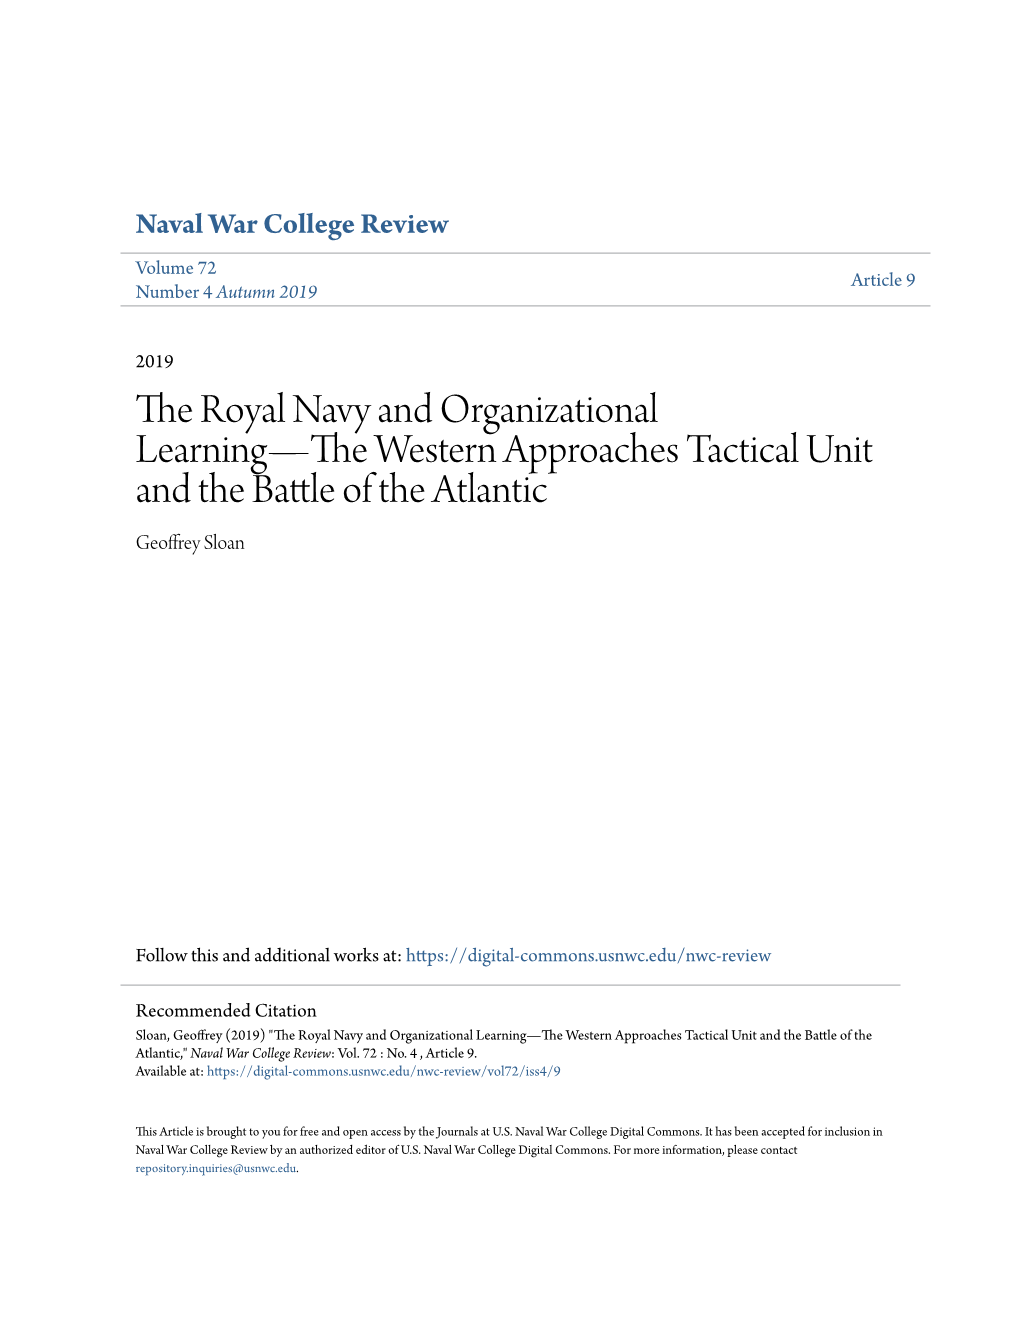 The Royal Navy and Organizational Learning—The Western Approaches Tactical Unit and the Battle of the Atlantic